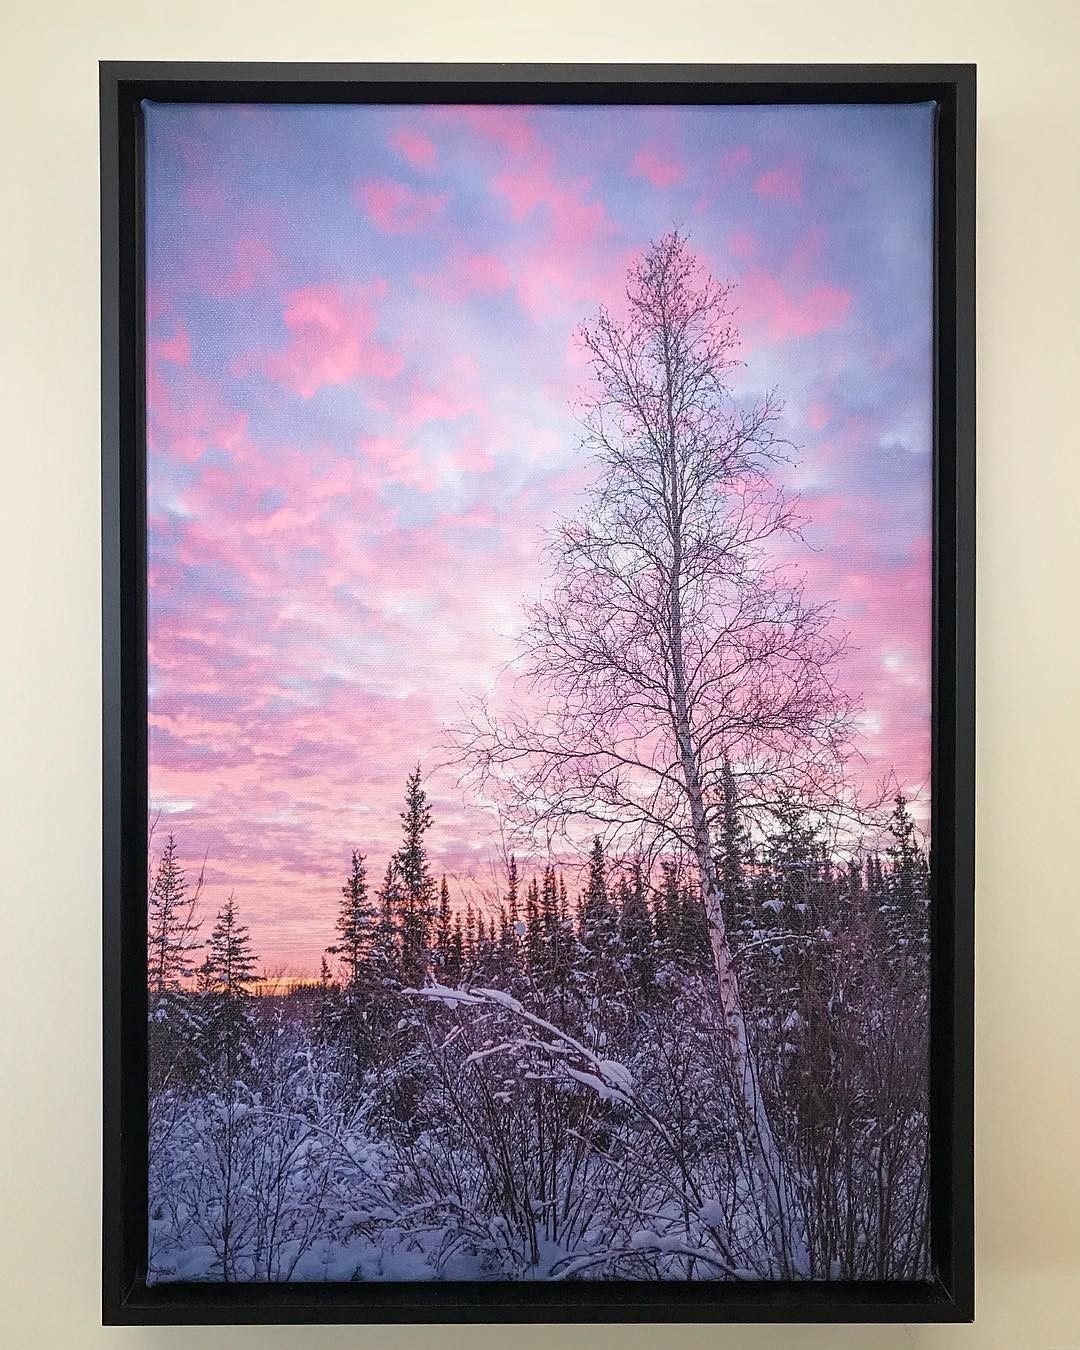 Northwest Territories Sunrise Printed on Canvas by Posterjack